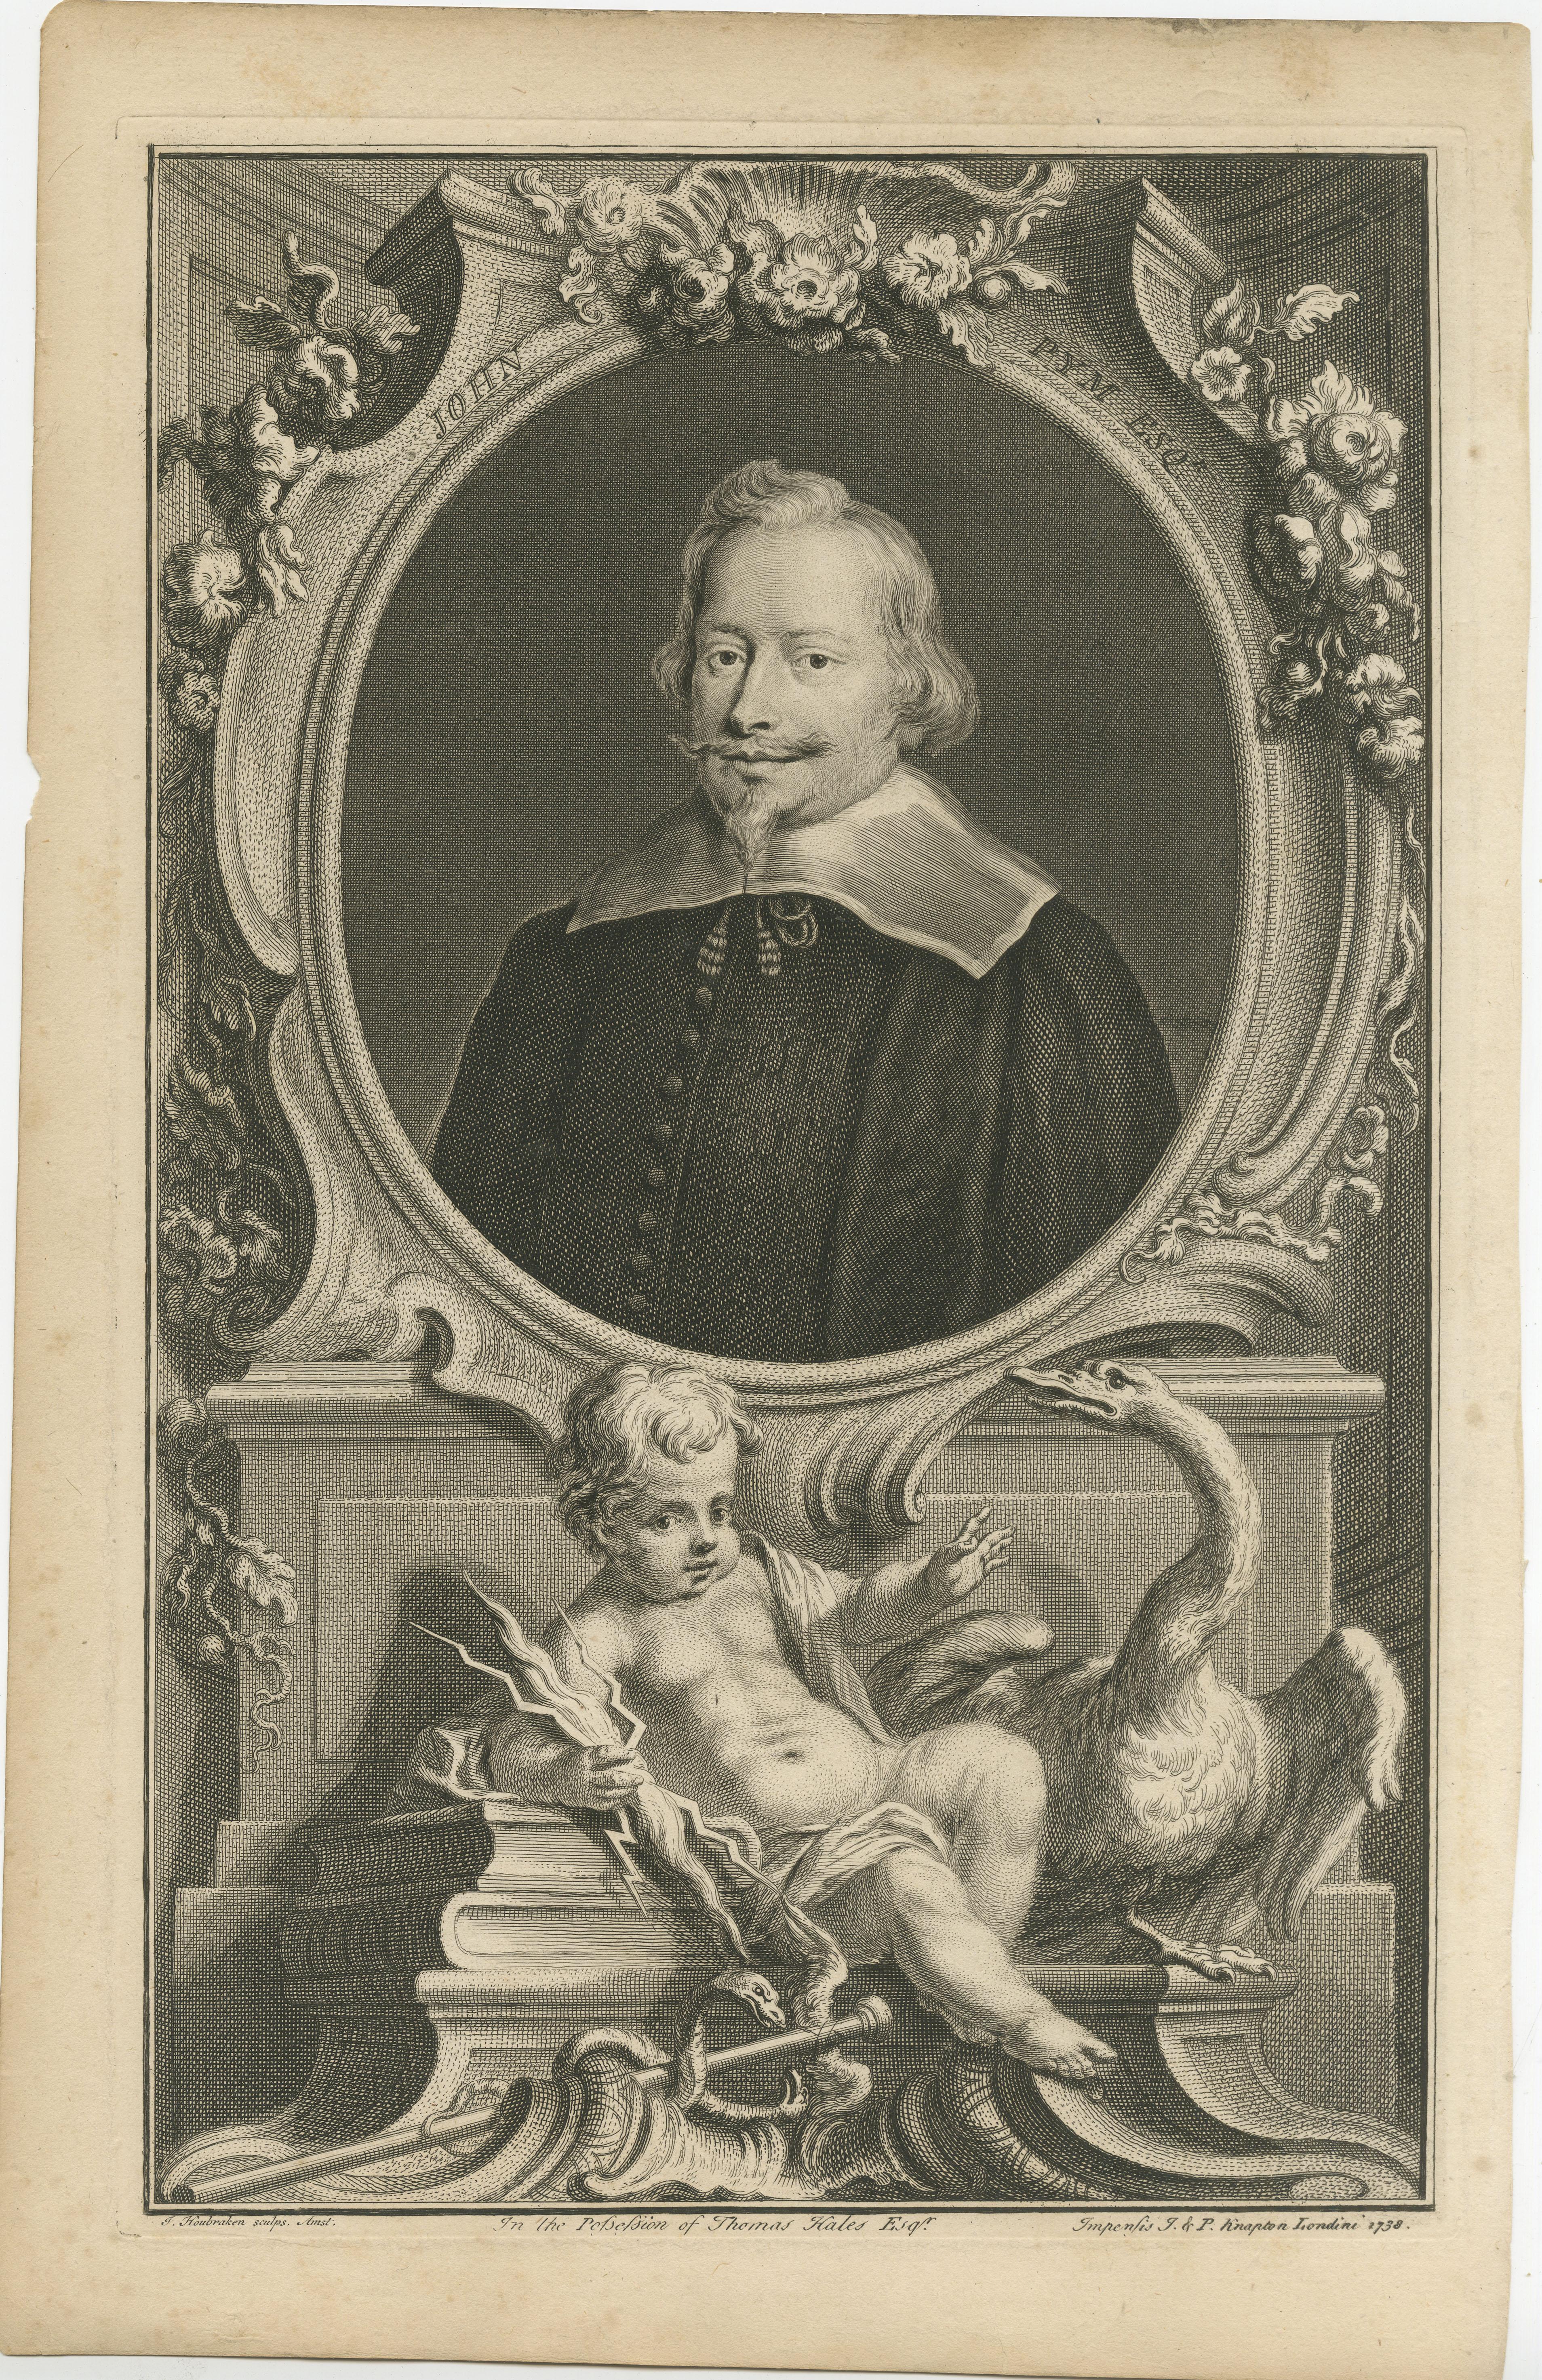 Antique portrait titled 'John Pym Esqr.'. Old print of John Pym, an English politician, who helped establish the foundations of Parliamentary democracy. One of the Five Members whose attempted arrest in January 1642 sparked the First English Civil